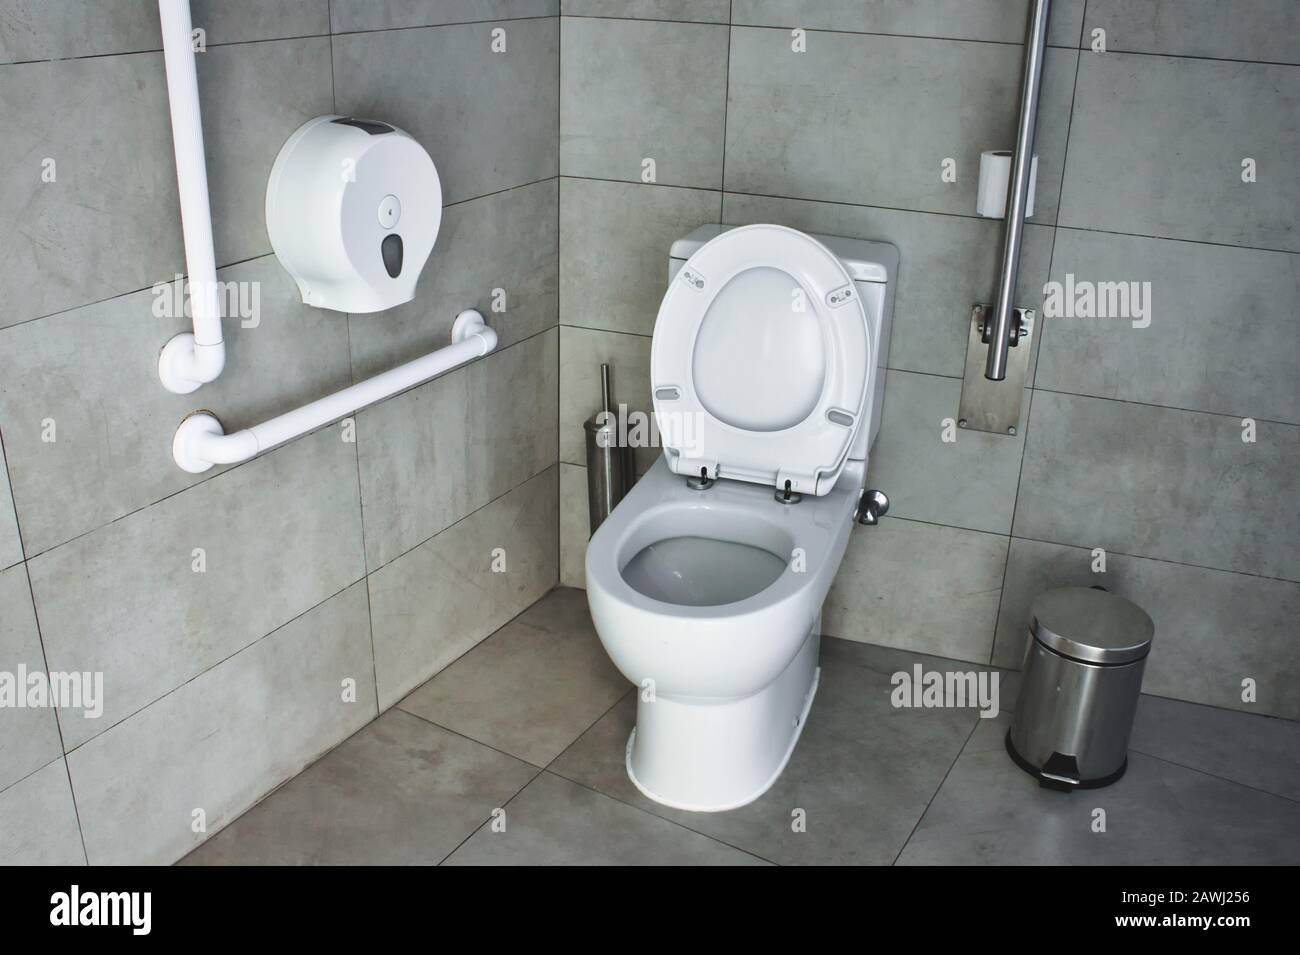 Interior of a disabled restroom with supports on the walls Stock Photo